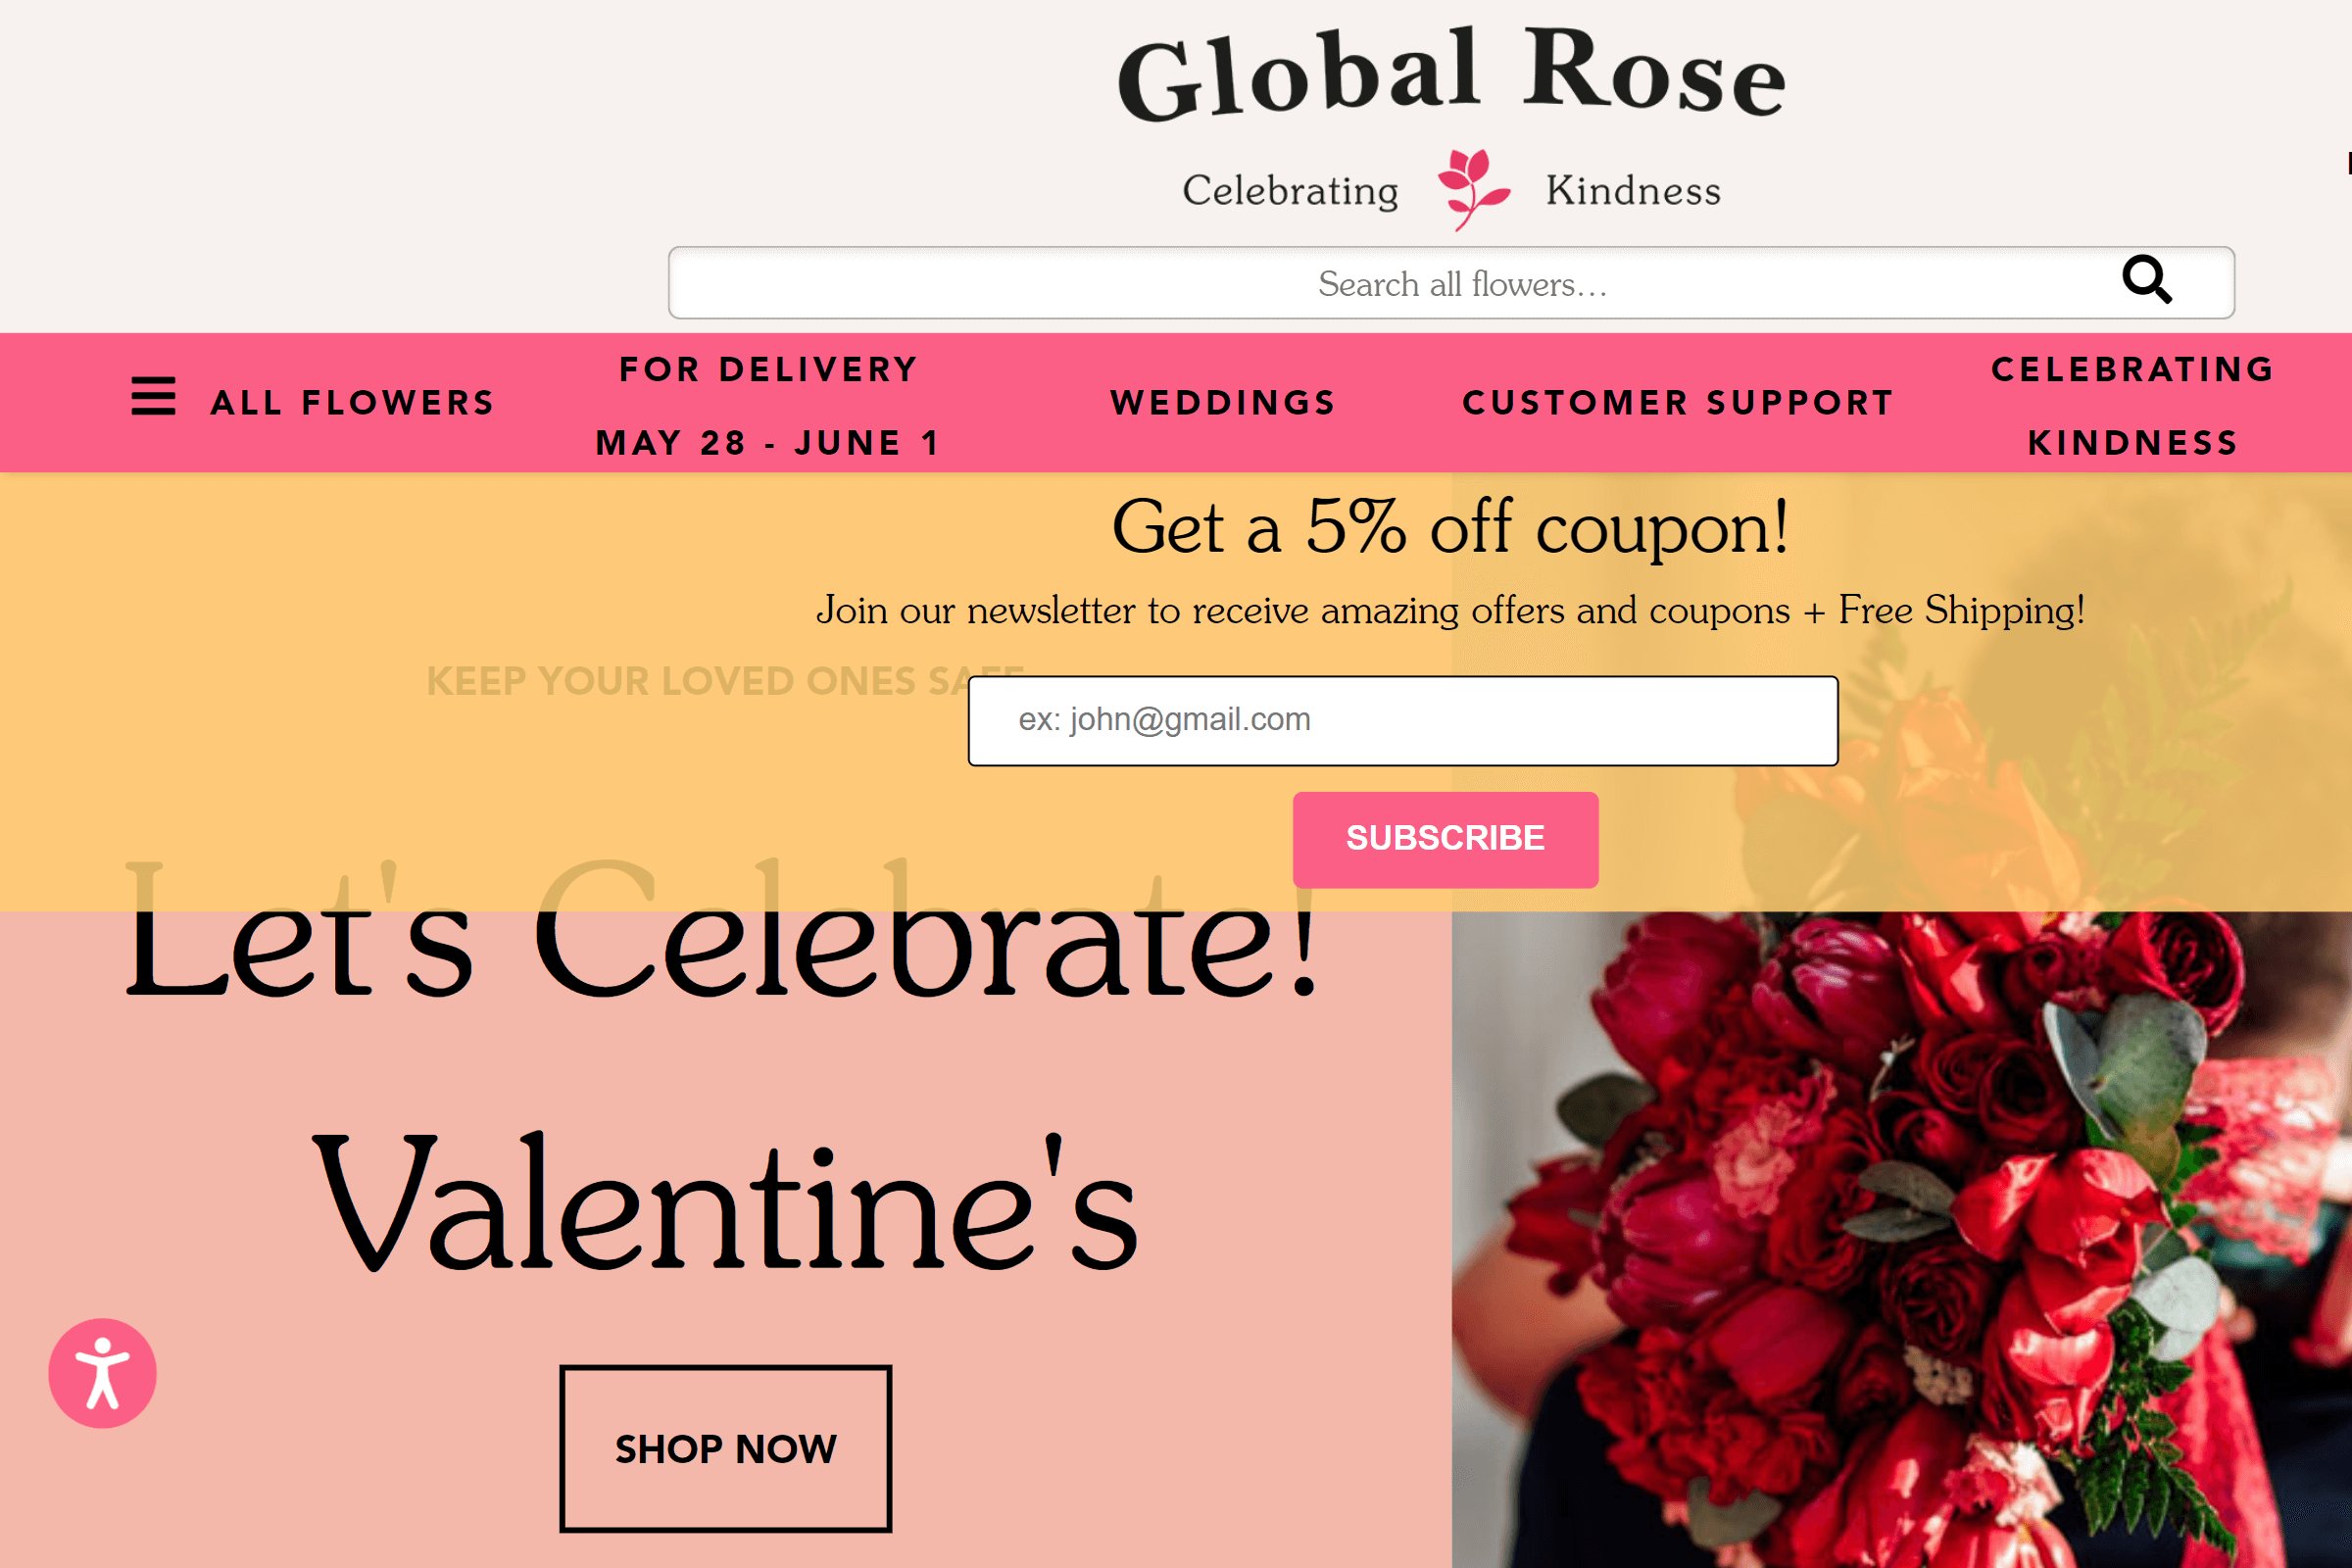 GlobalRose on ReadSomeReviews